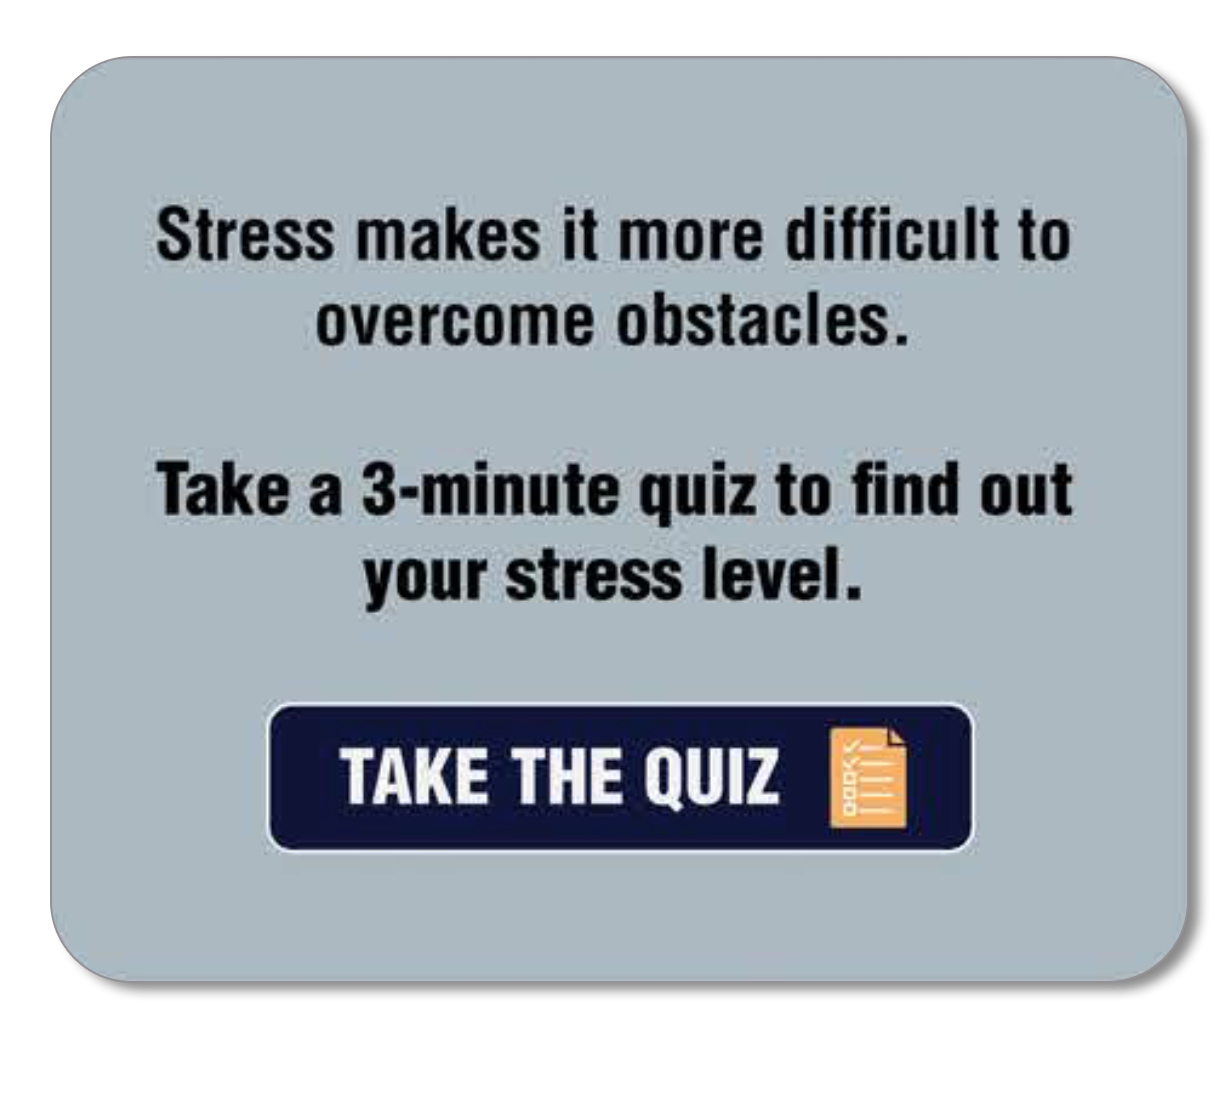 Stress makes it more difficult to overcome obstacles. Take a 3 minute quiz to find out your stress level.